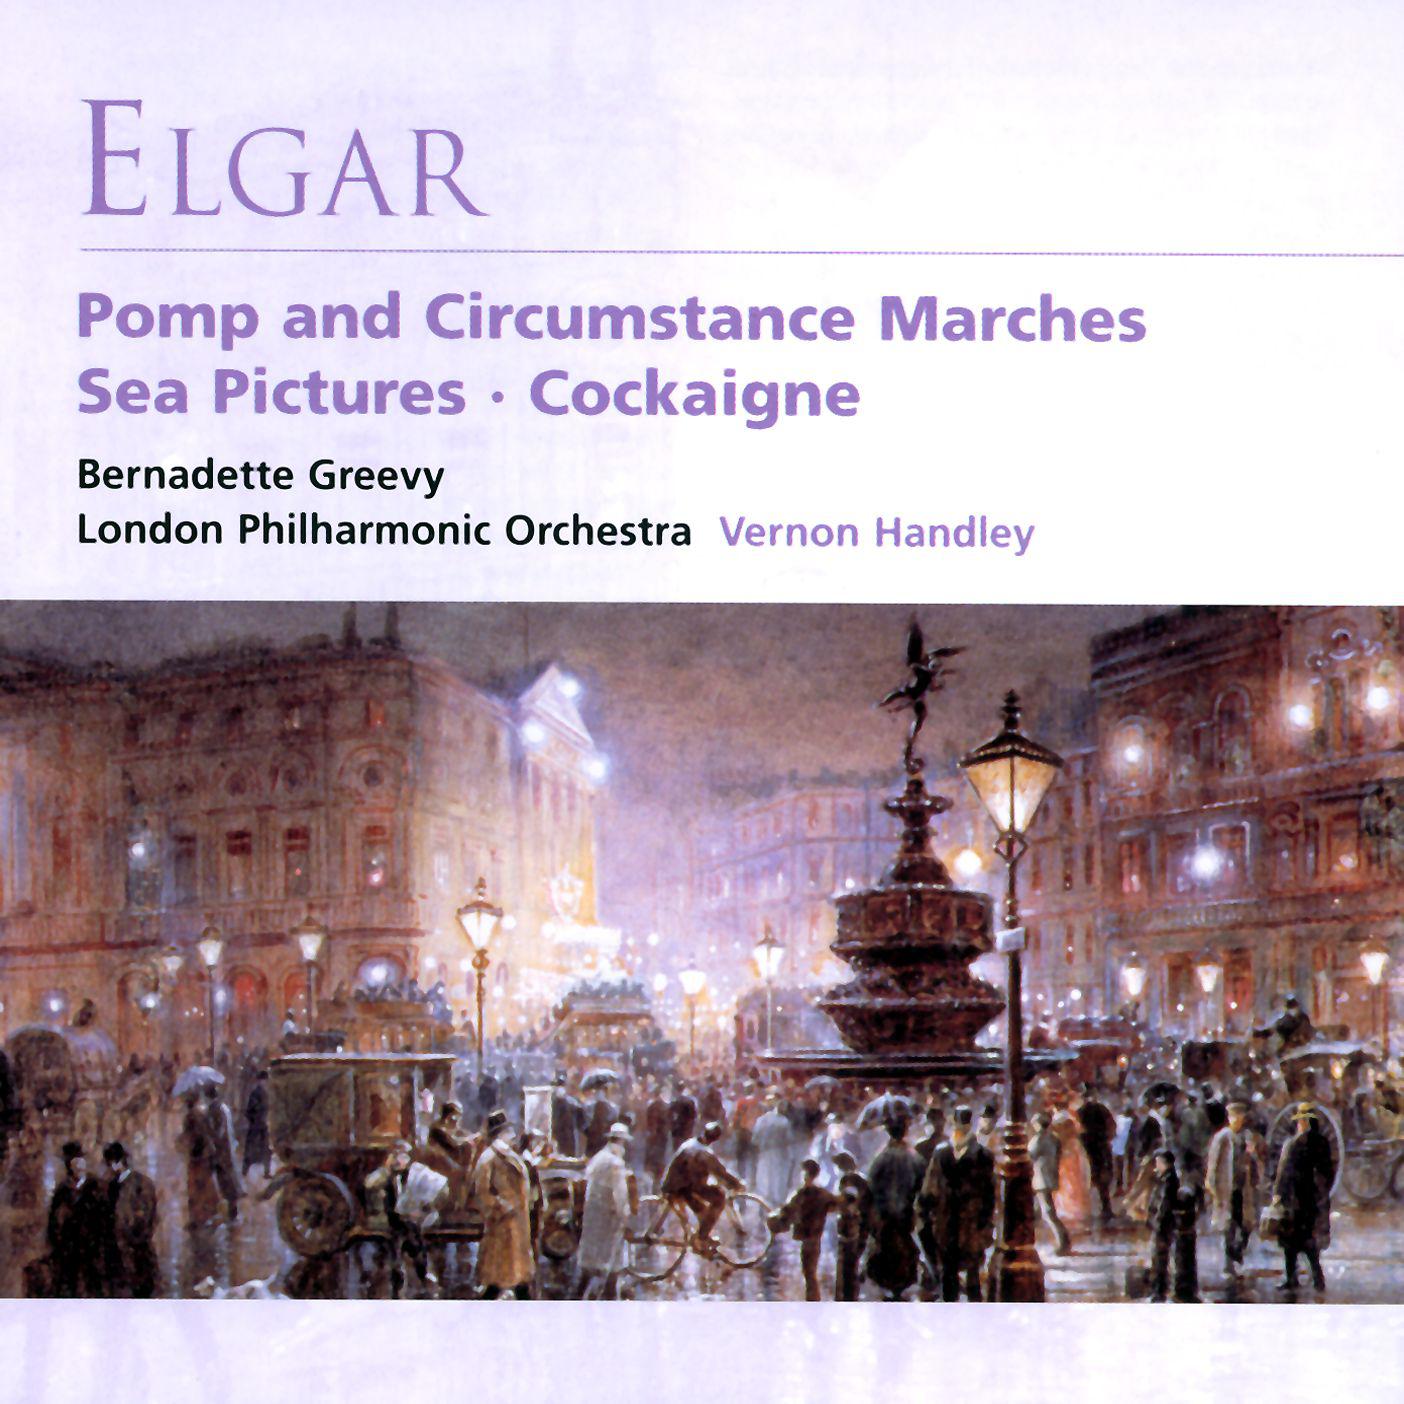 Pomp and Circumstance - Military Marches, Op.39: No. 2 in A Minor